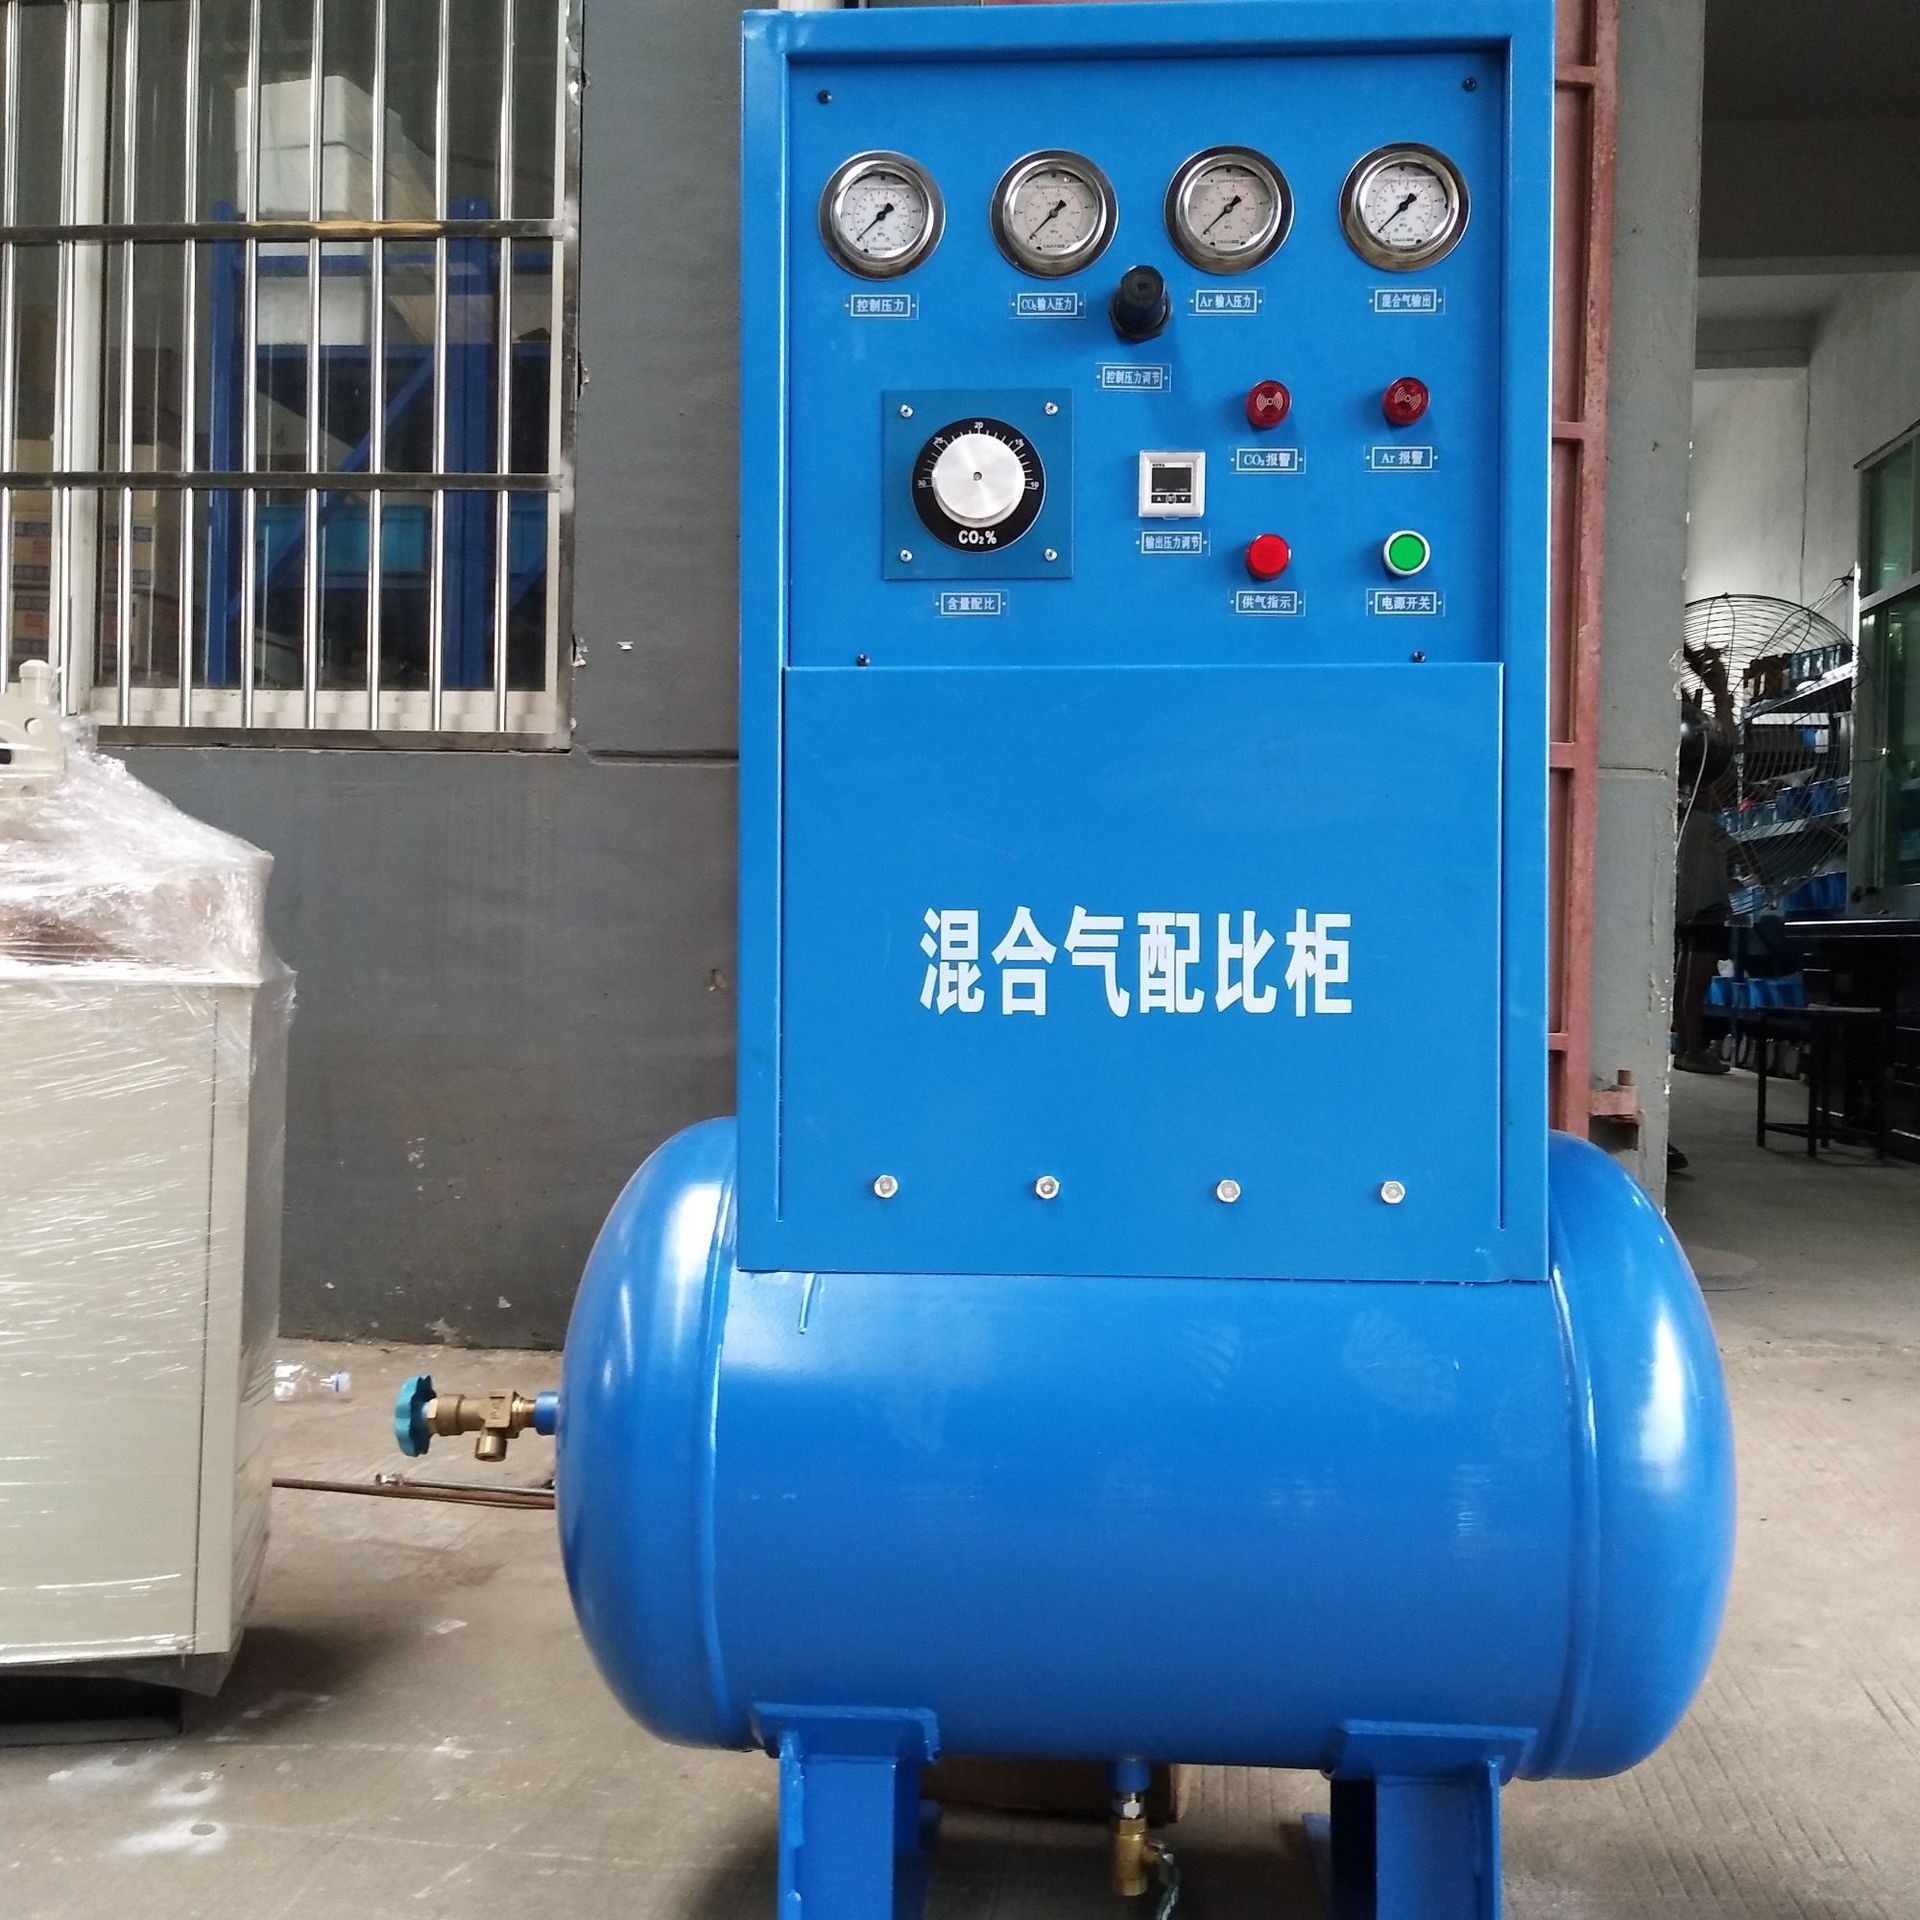 Manufacturers supply mixed gas Ratio Gas mixing cabinet fully automatic Switching device Customizable